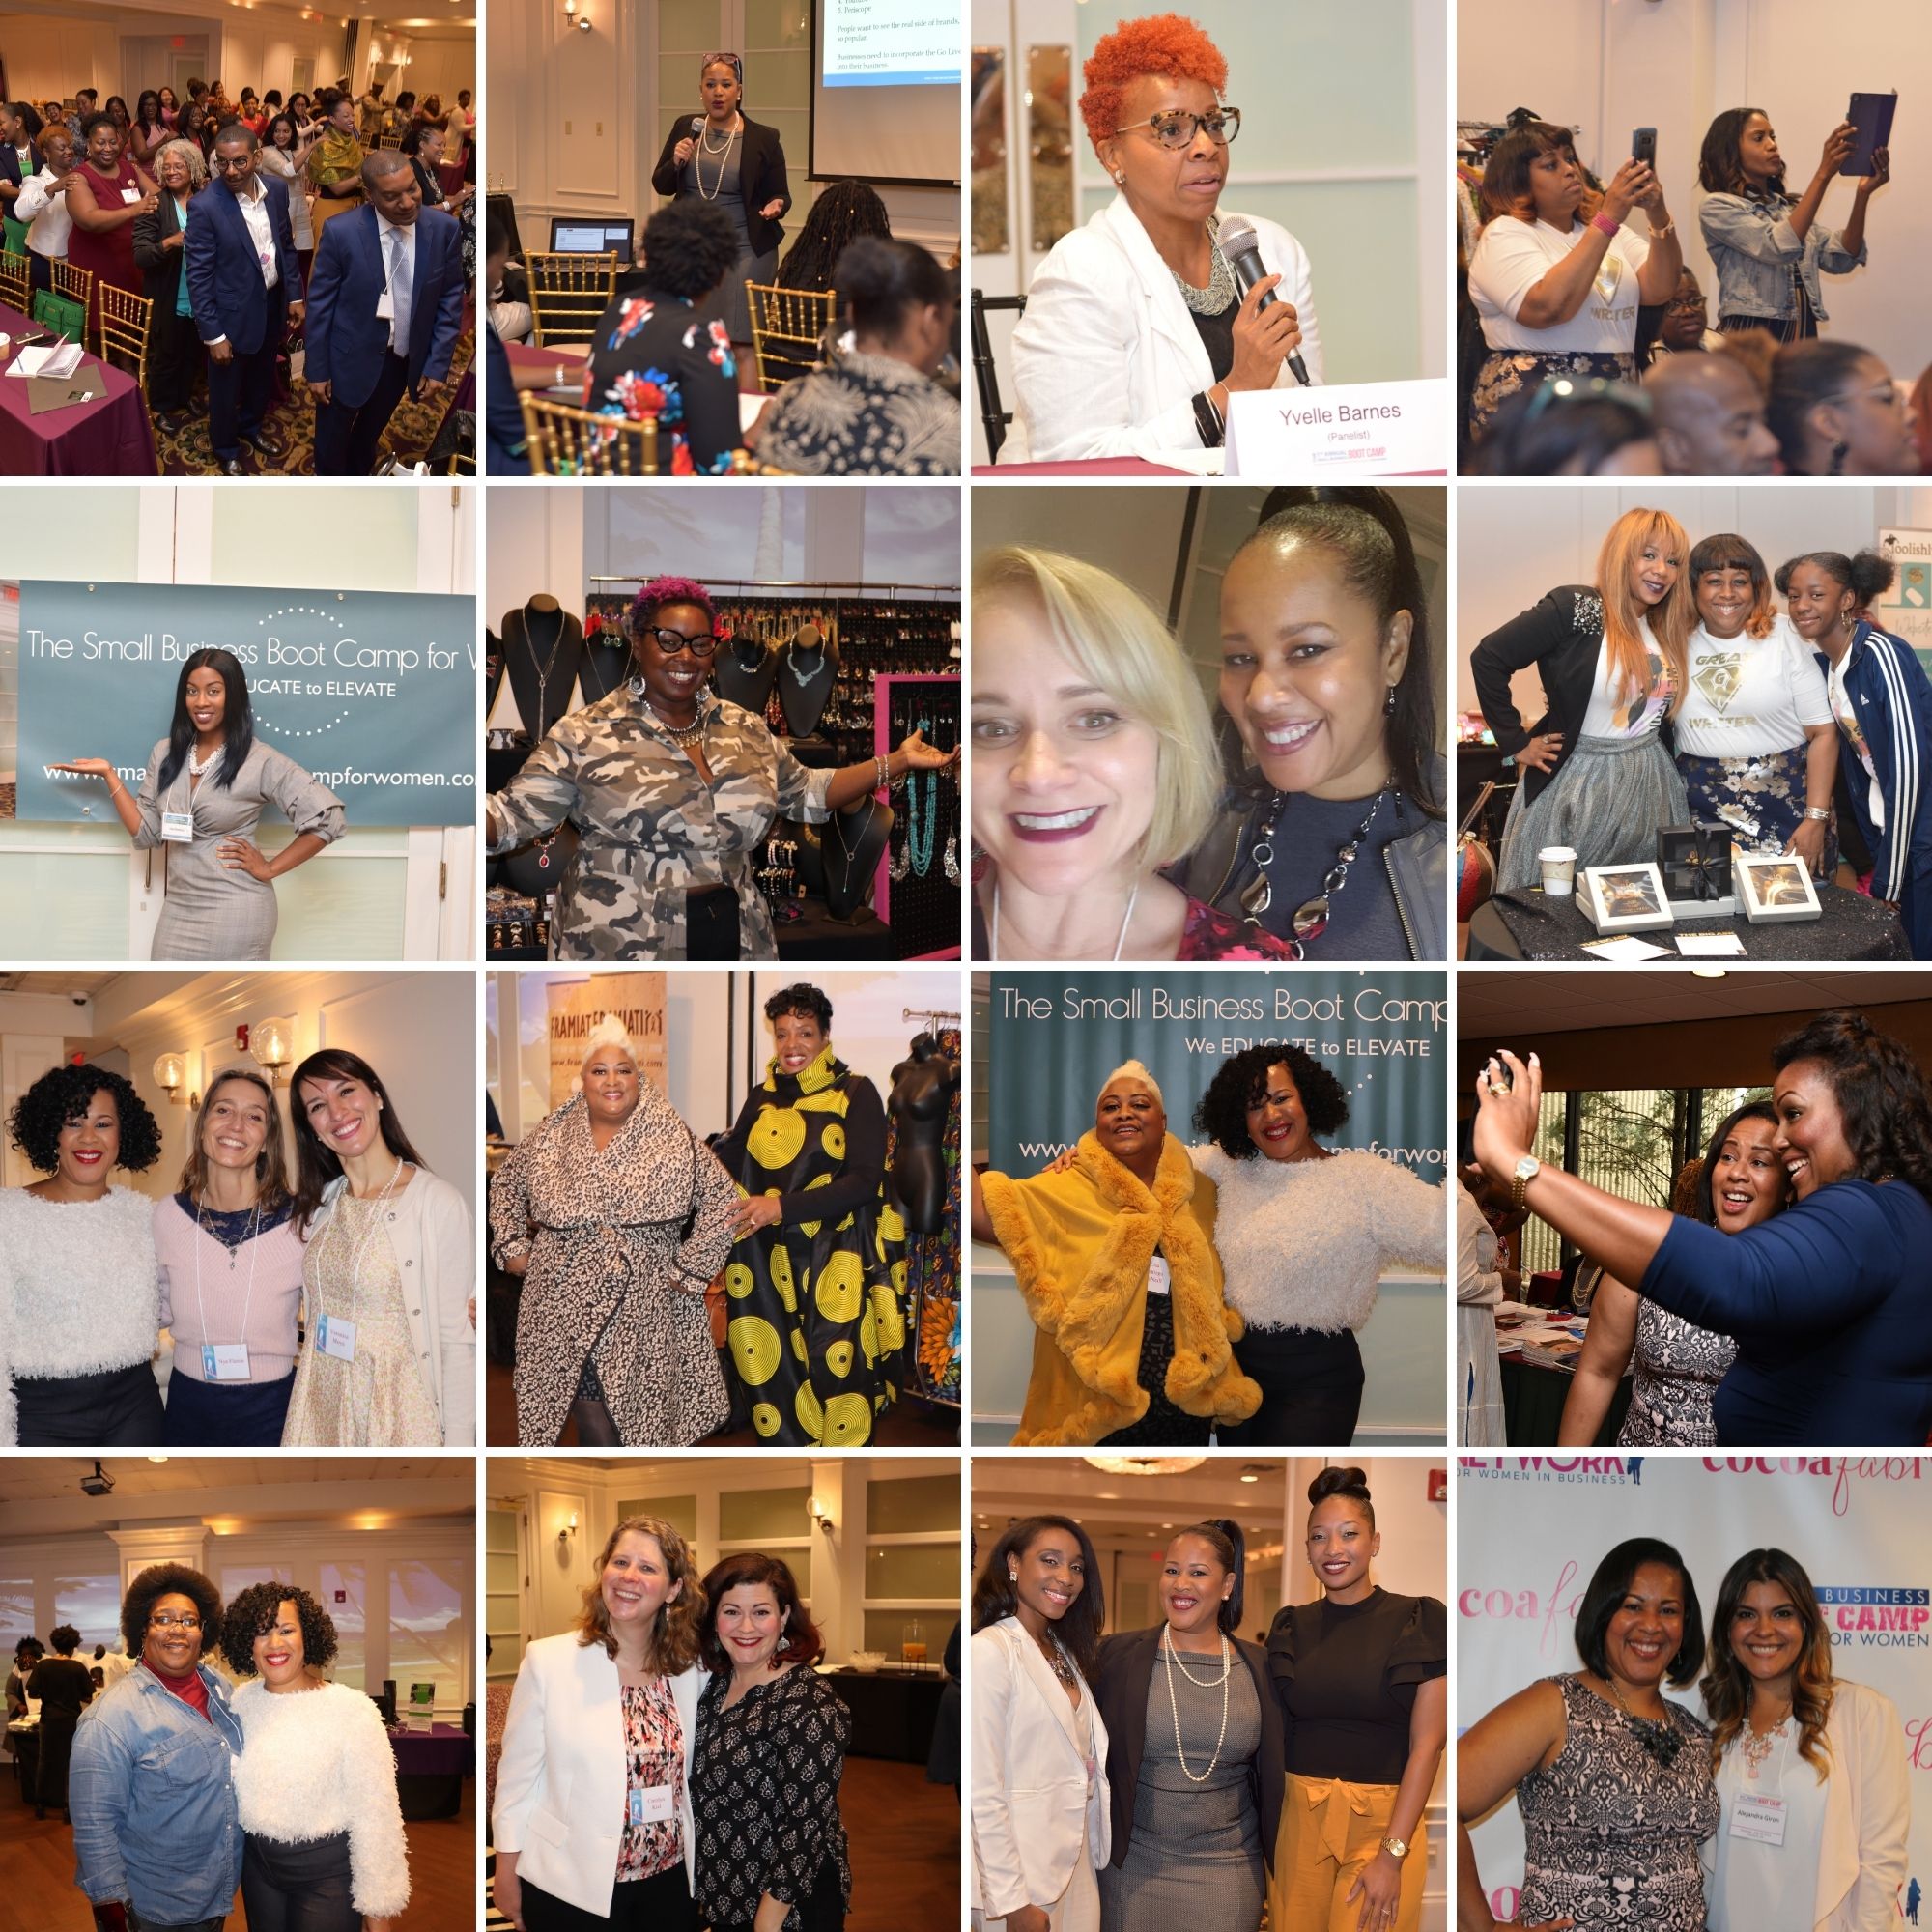 The Small Business Boot Camp for Women Celebrates its 10 Year Anniversary with a 3-Night Virtual Training & Networking Event